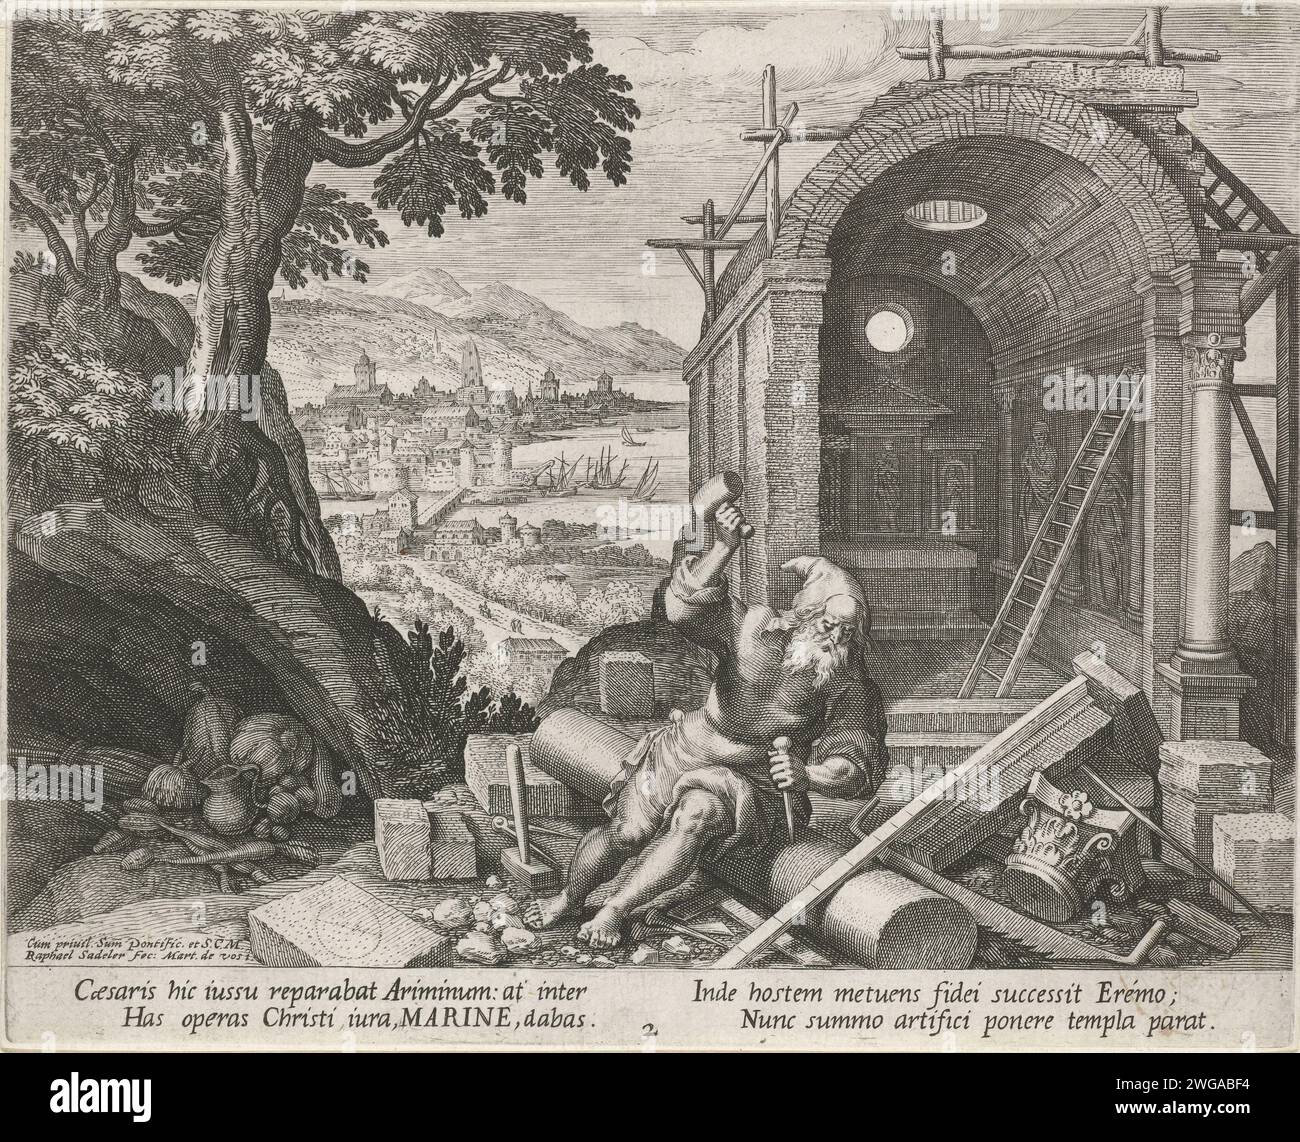 Holy Marinus as a recluse, Raphaël Sadeler (I), After Maerten de Vos, 1600 print In the foreground the H. Marinus of Rimini, an early Christian hermit. He edits a column with a hammer and chisel. Around him construction tools and a church in construction. In the background the city of San Marino. Venice paper engraving male saints (with NAME). anchorite, hermit. mason at work. building of church San Marino Stock Photo